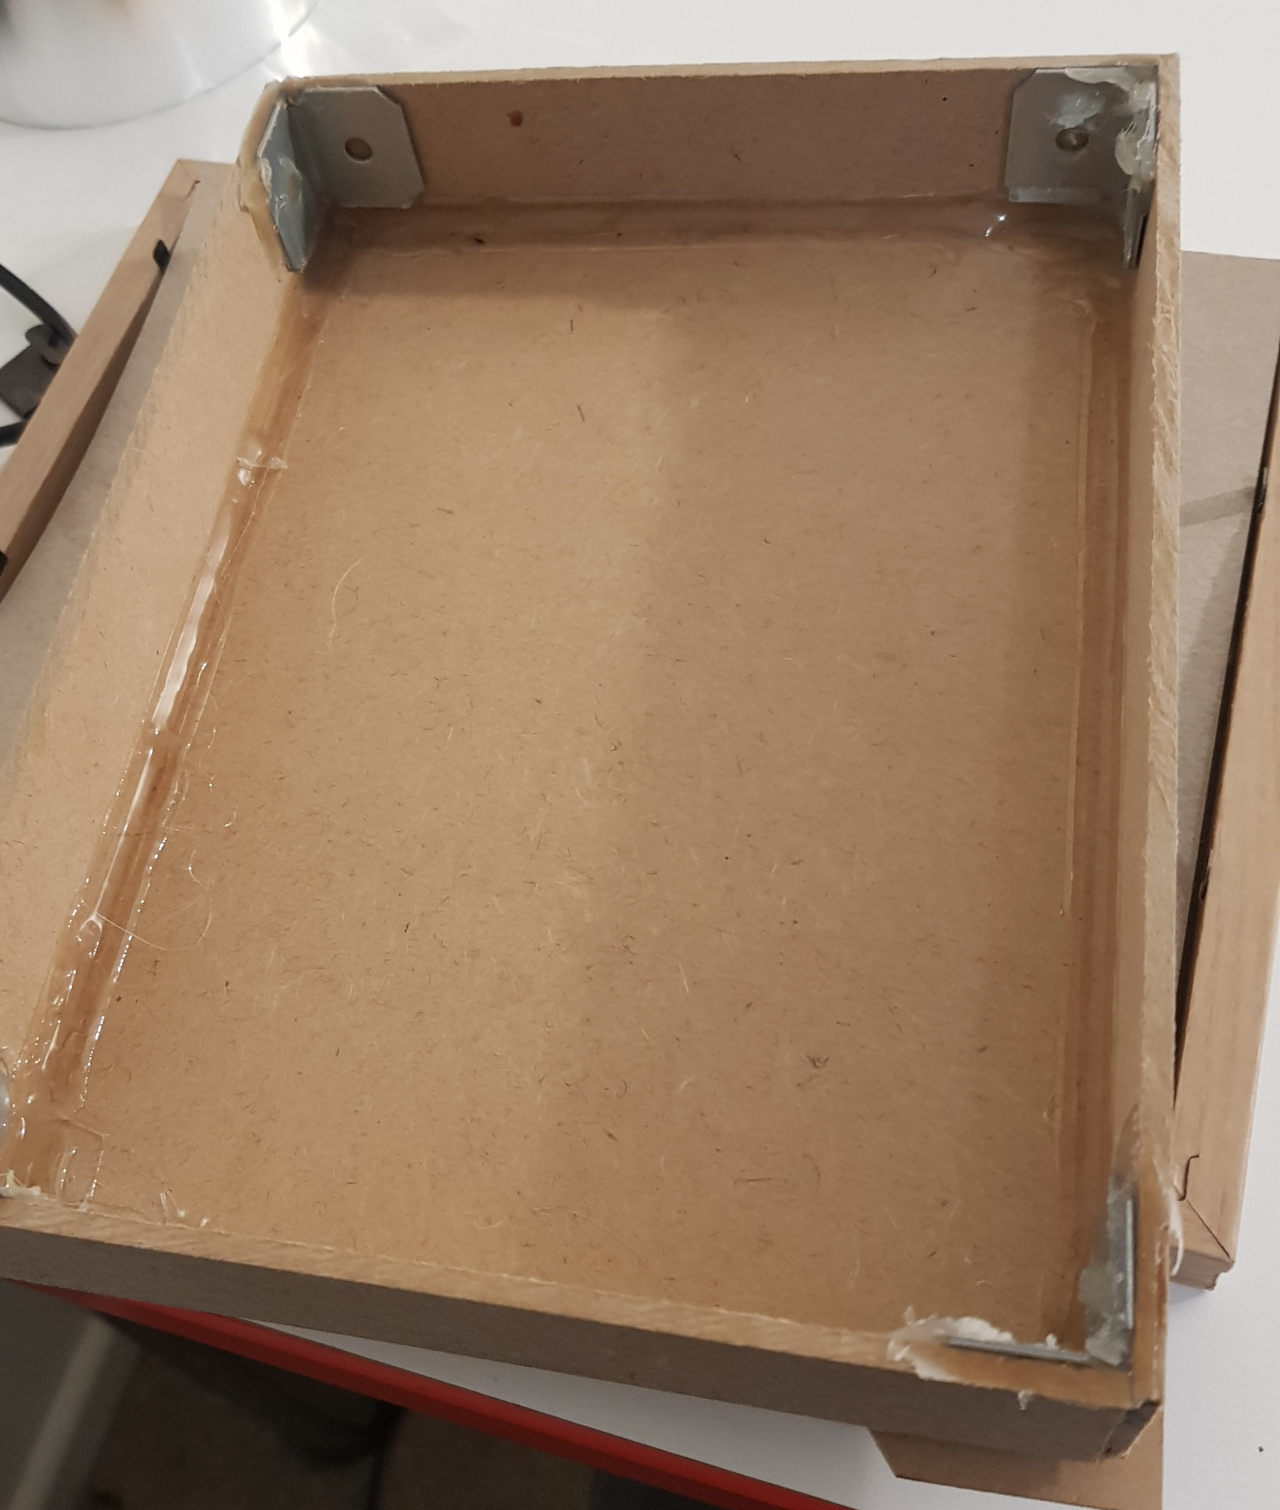 The inside of a fabricated MDF box, showing angle brackets at the corners affixed with hot glue, and a back panel affixed with a bead of hot glue along the inside edge.